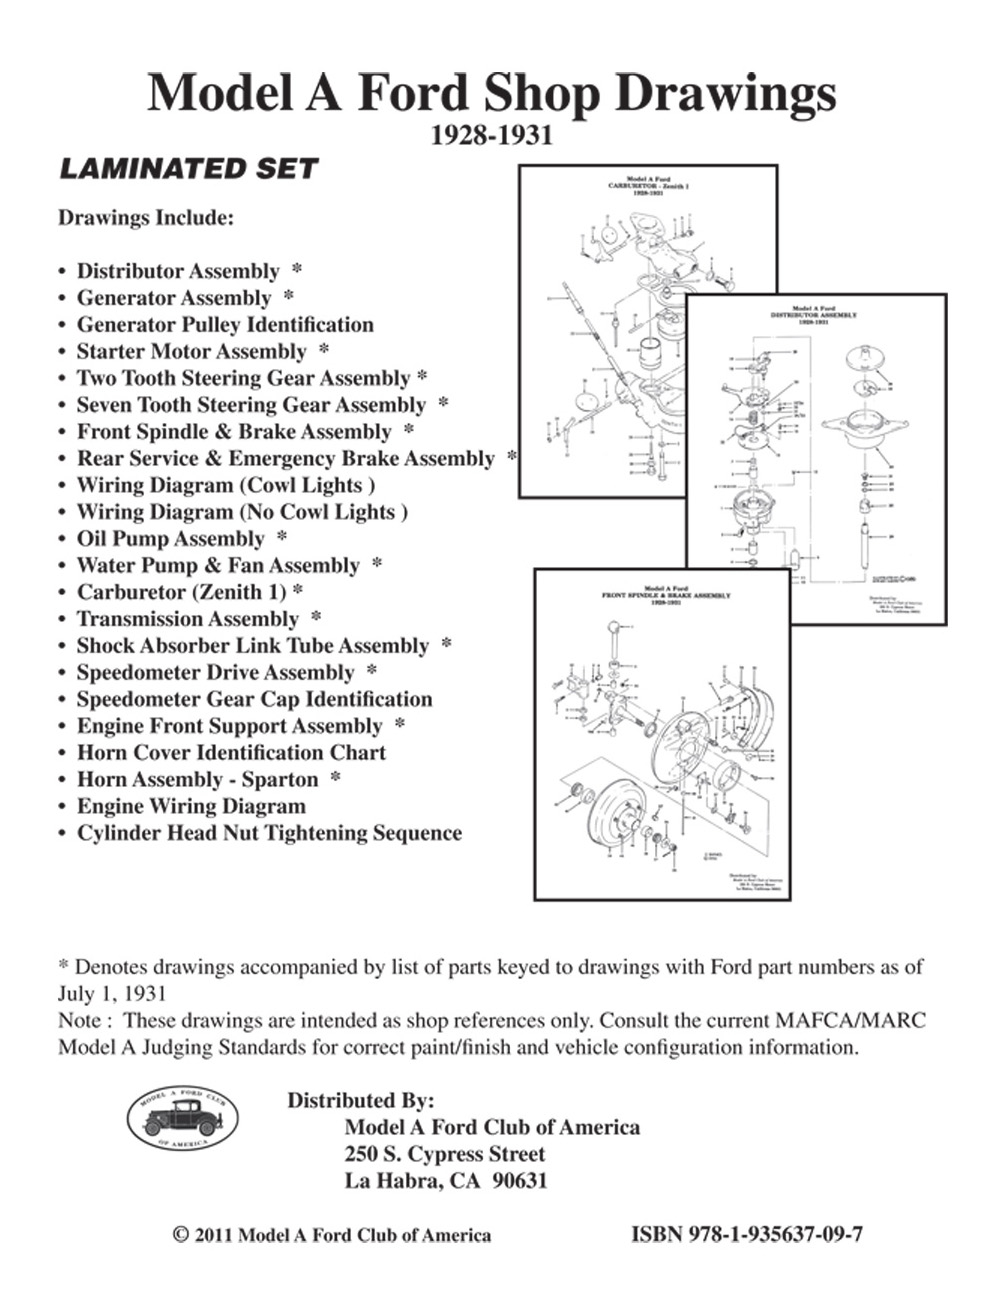 Model A Shop Drawings (22 page set)